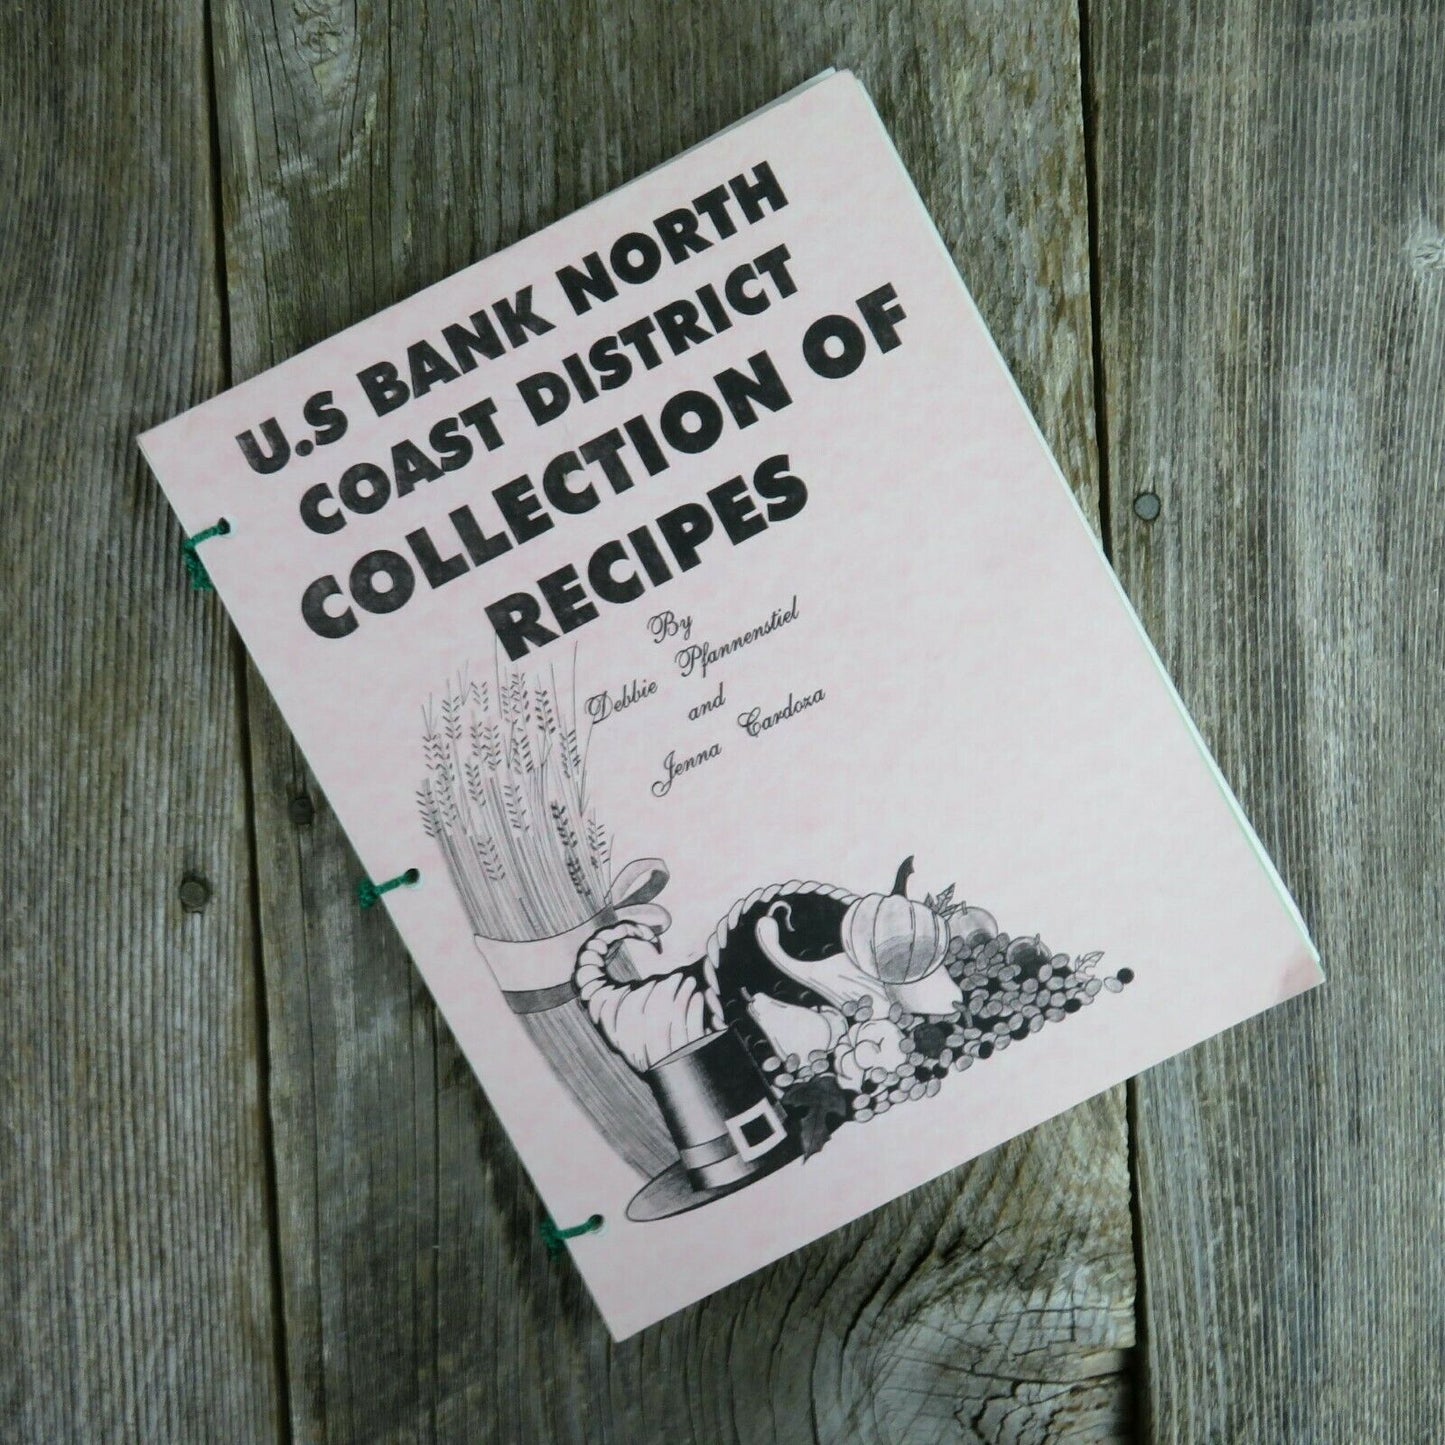 Vintage California Cookbook US Bank North Coast District Collection of Recipes - At Grandma's Table